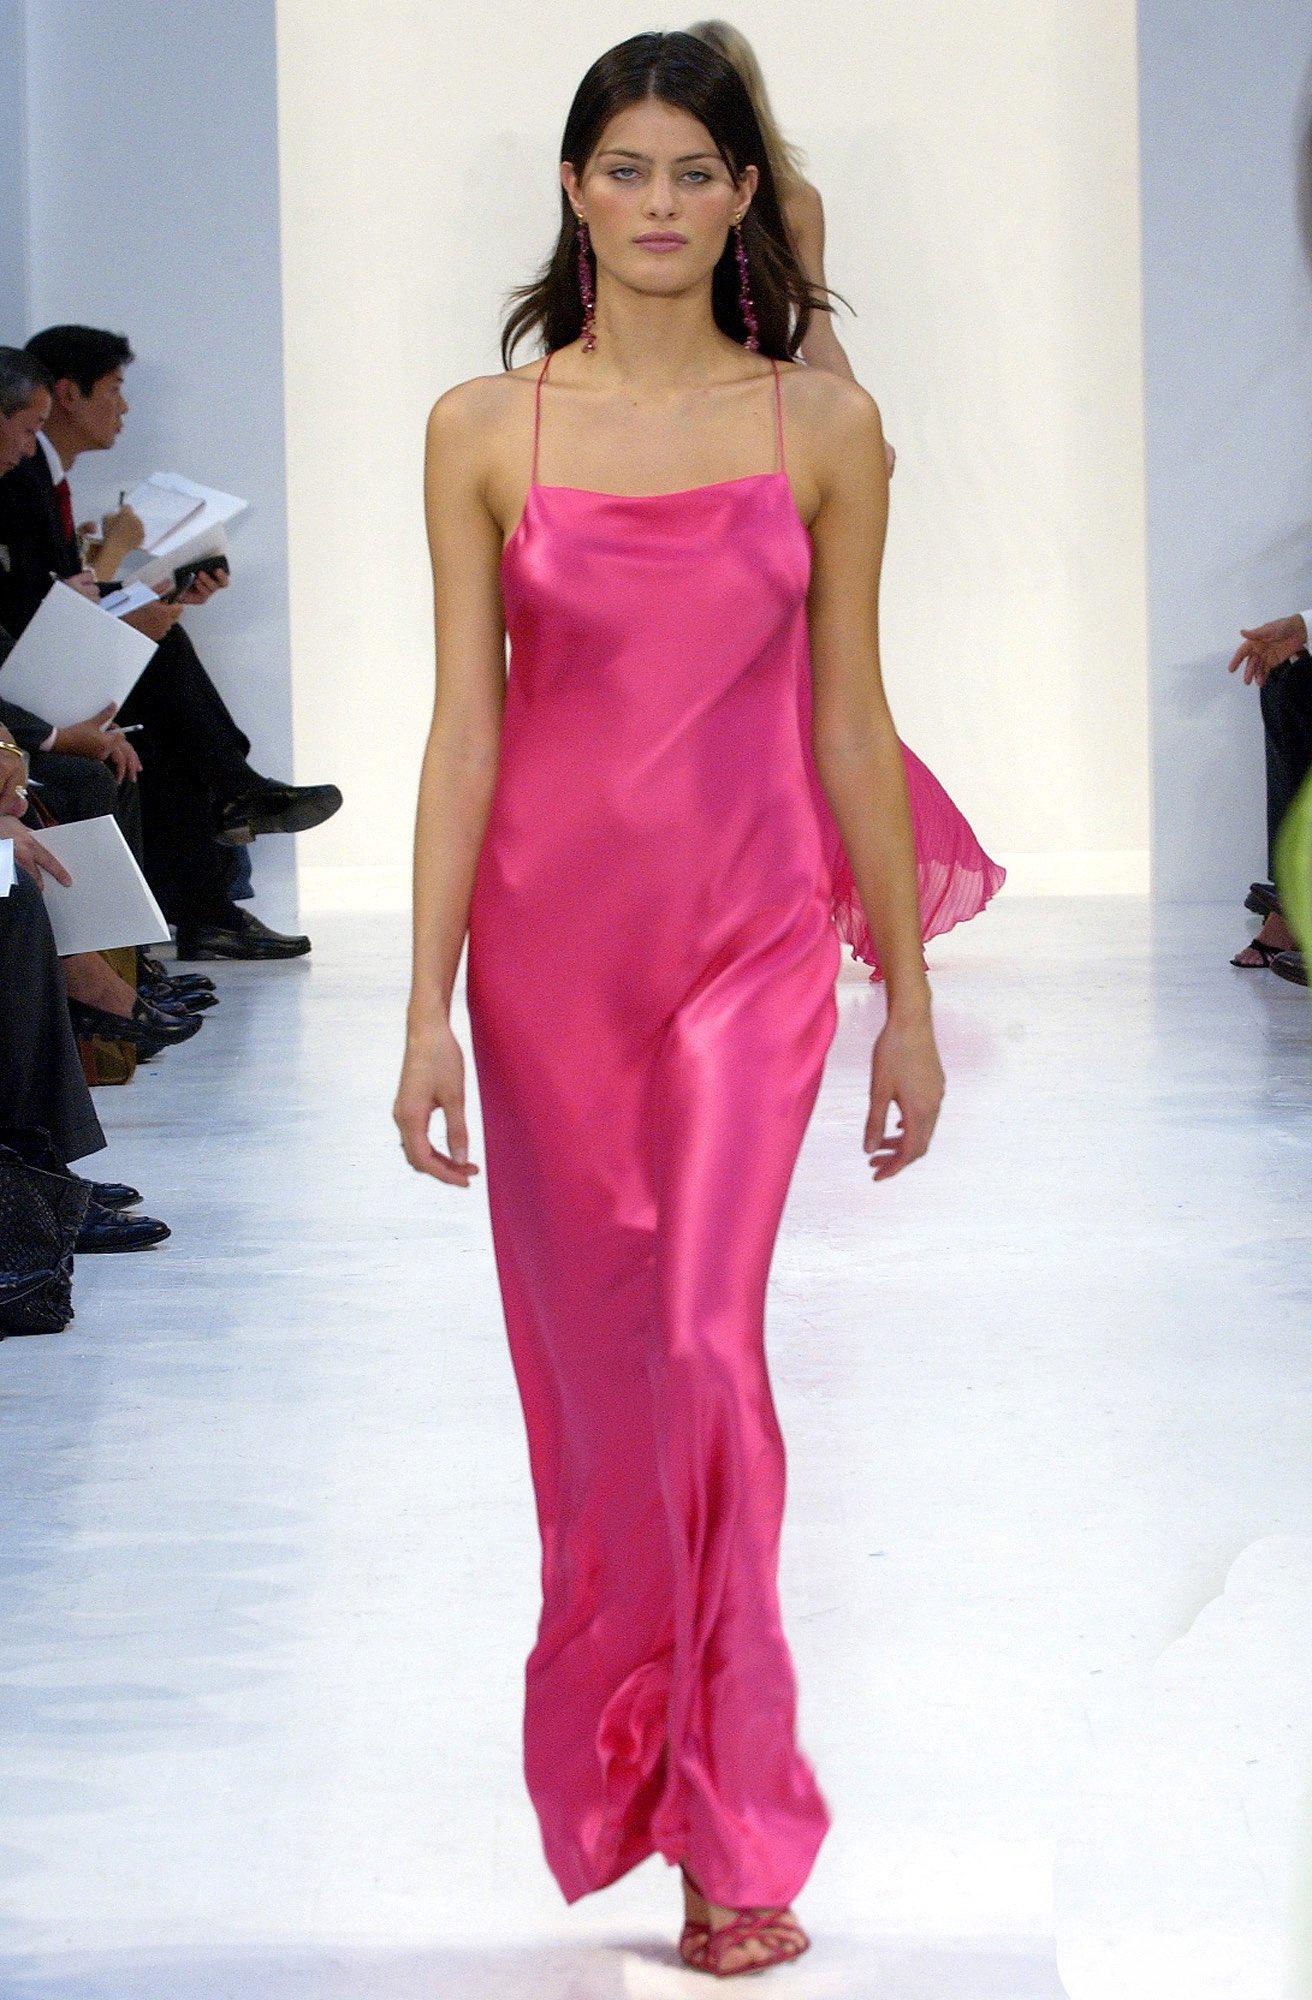 S/S 2004 Ralph Lauren Runway Hot Pink Silk Satin Backless Slip Gown  In Excellent Condition For Sale In West Hollywood, CA